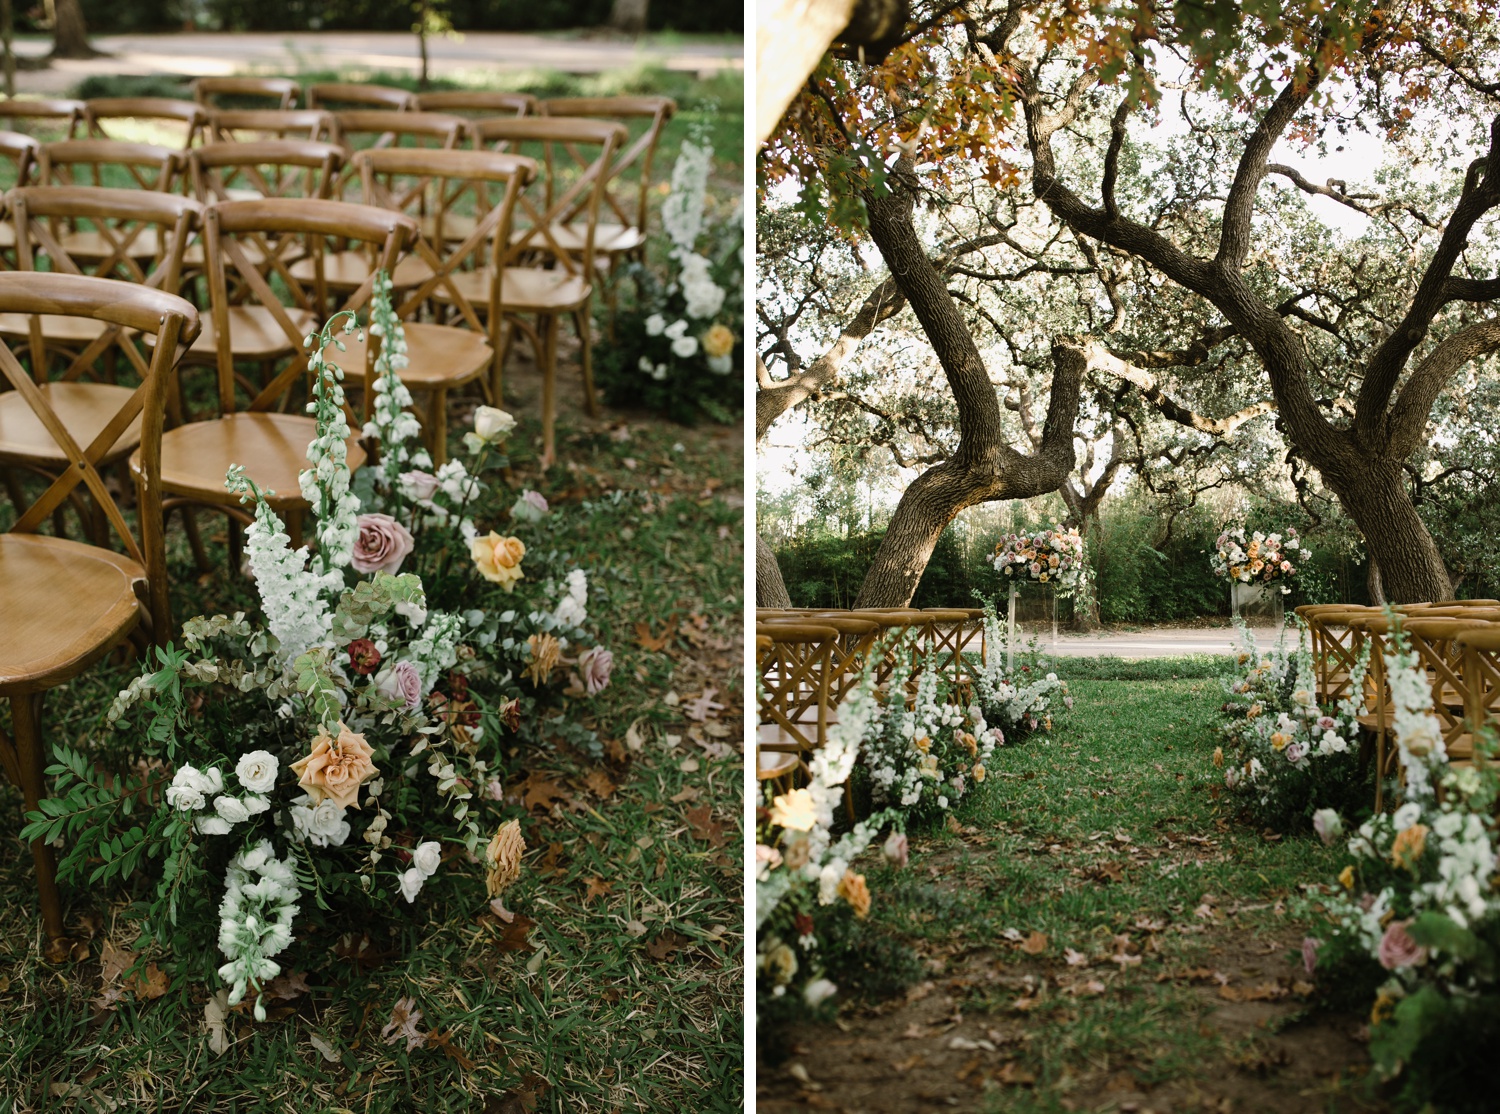 Outdoor wedding ceremony featuring wooden cafe chairs and floral installations underneath live oak trees